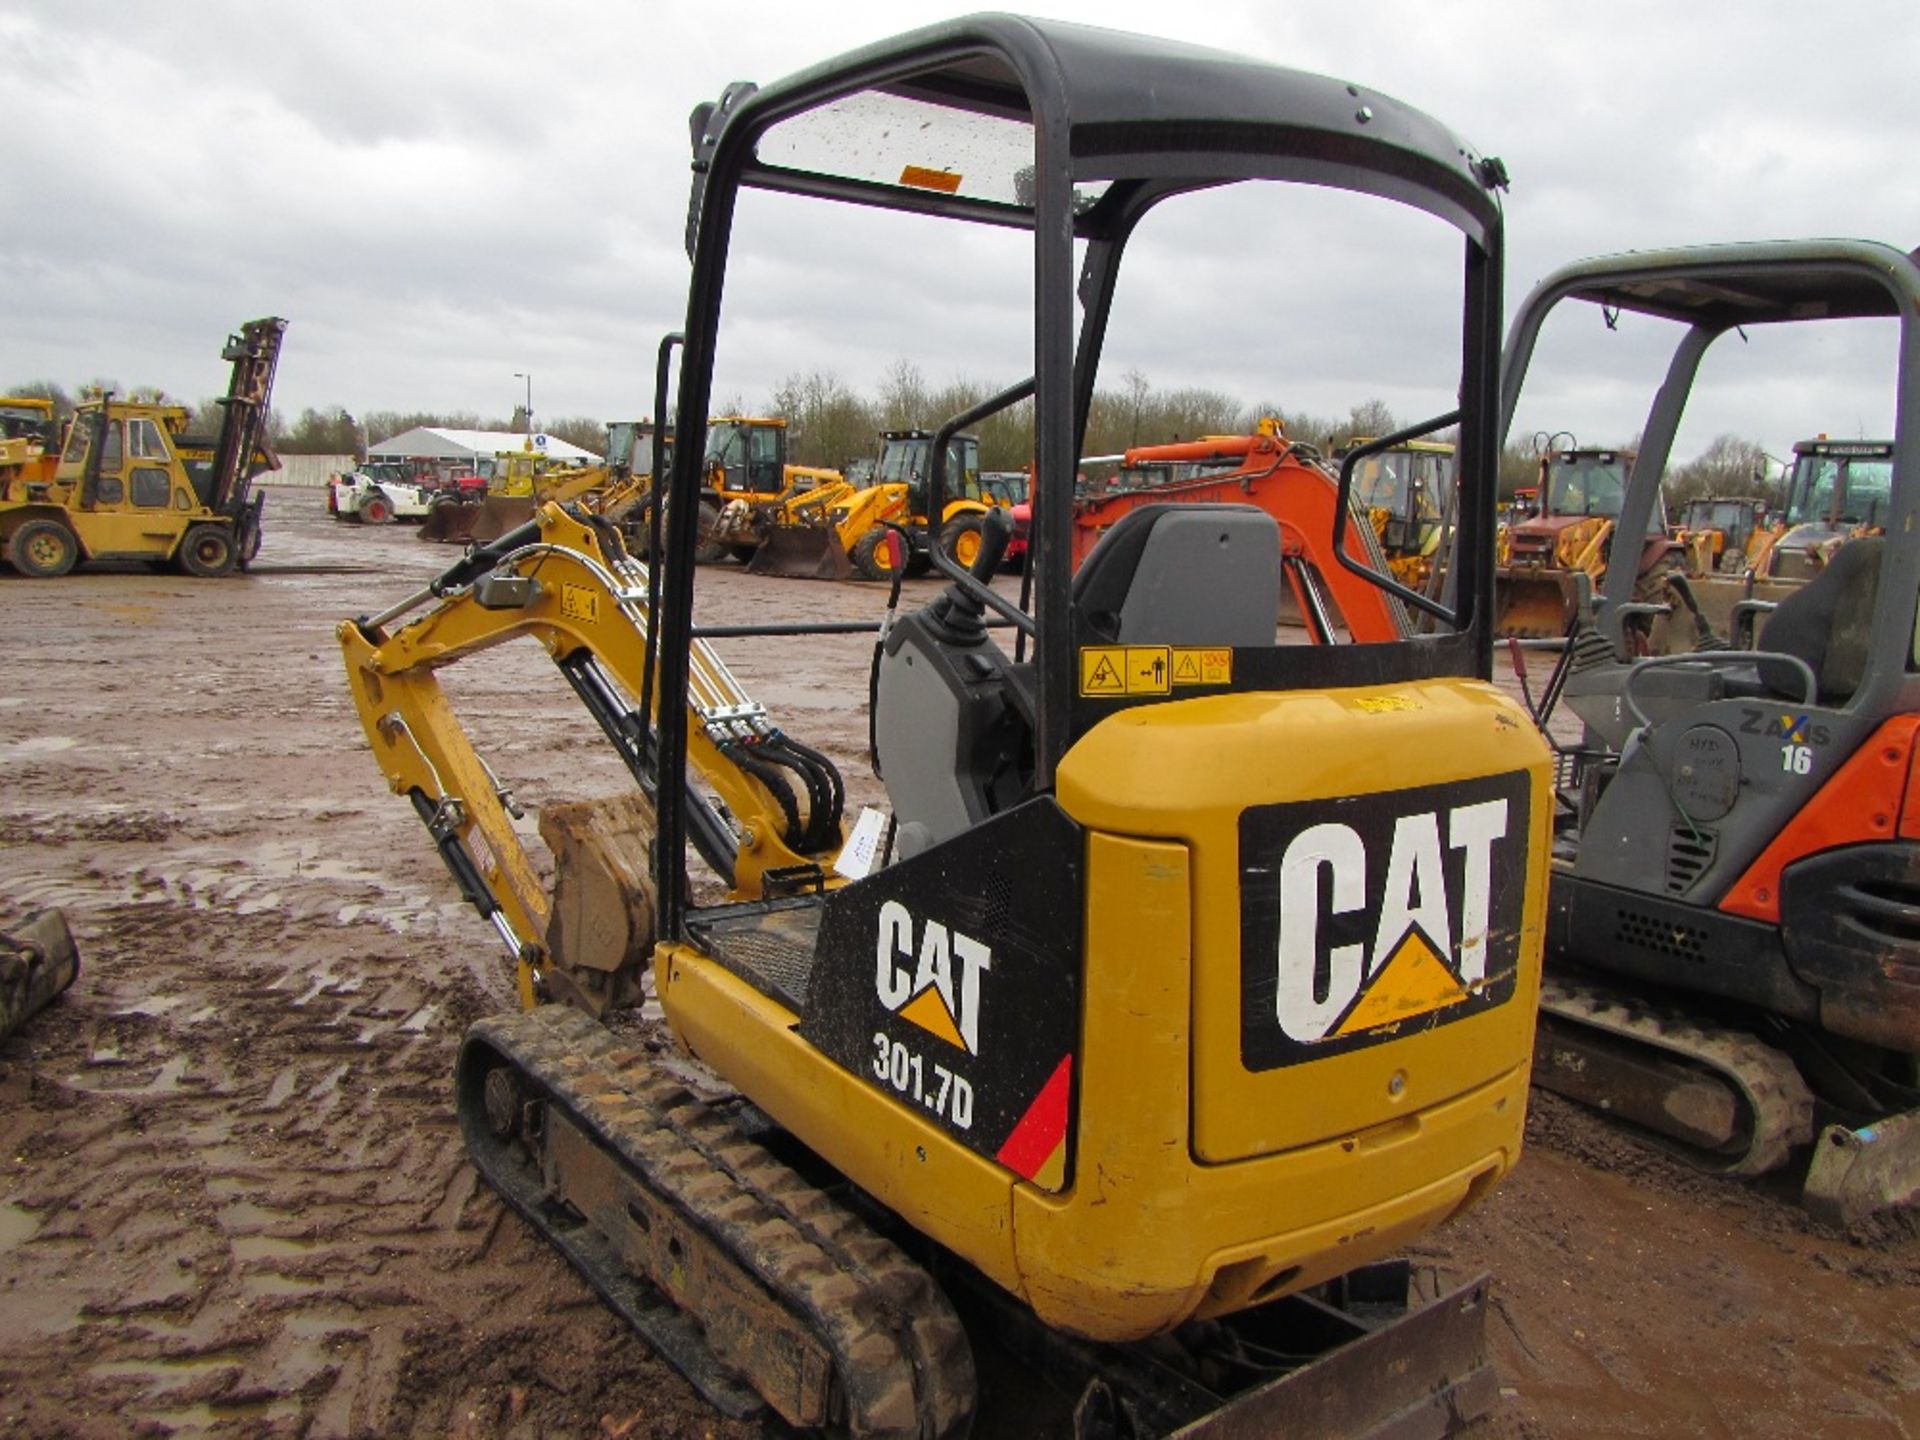 2015 Cat 3014.7D Mini Digger c/w Tracks, Blade, Canopy Cab, on Rubber 600 Hrs - Image 6 of 6